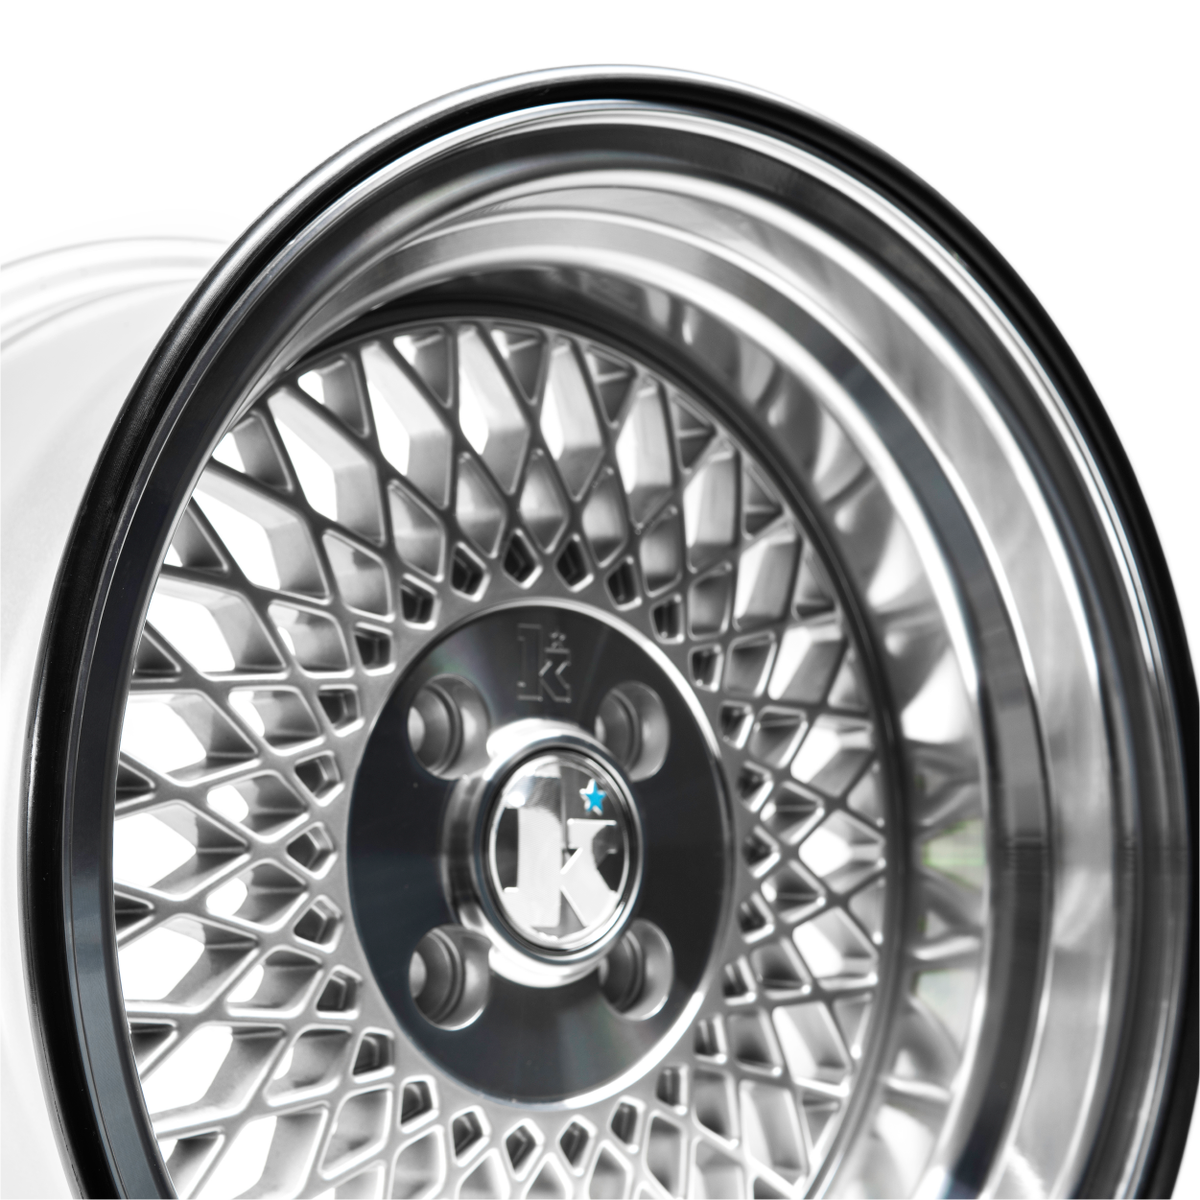 Black and white image of an alloy wheel with a fitted RIMFINITY continuous band technology for protecting the wheel